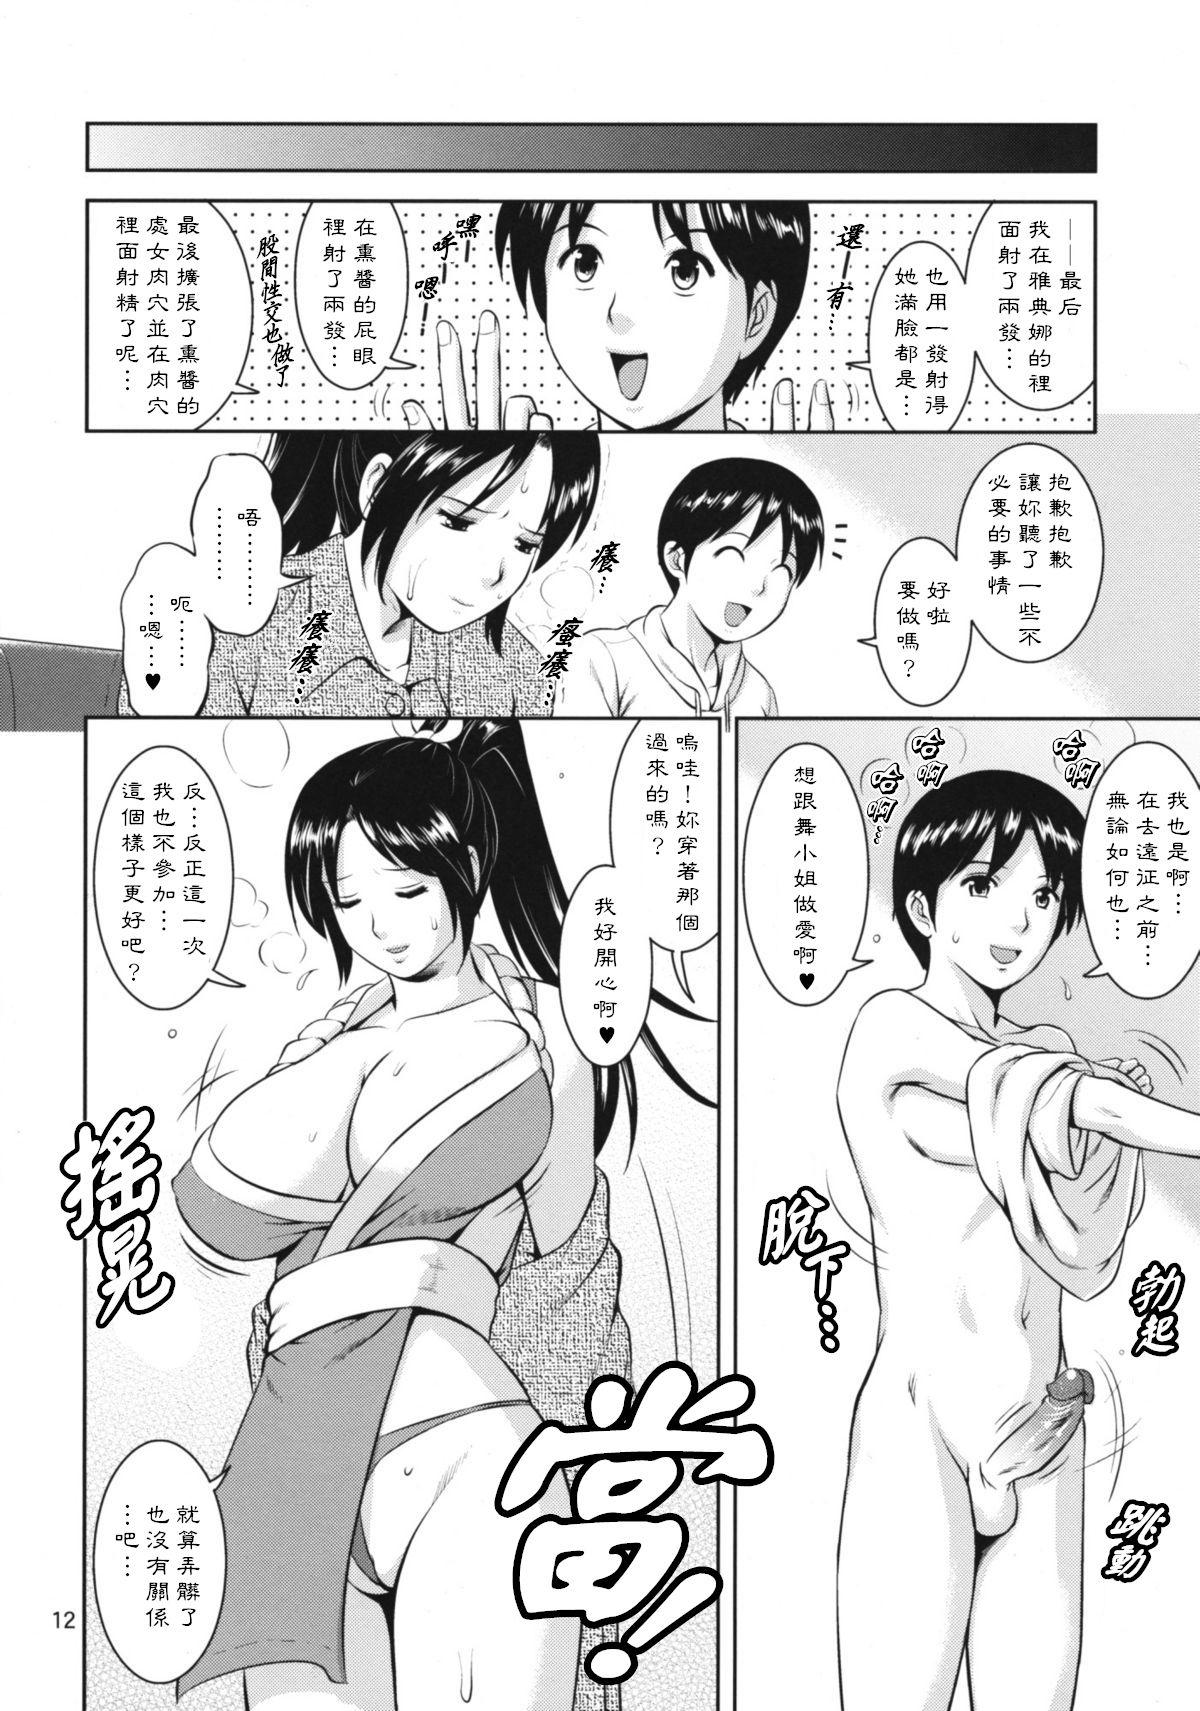 Scandal The Yuri & Friends 2009 UM - Unparticipation of Mai - King of fighters Blow - Page 11